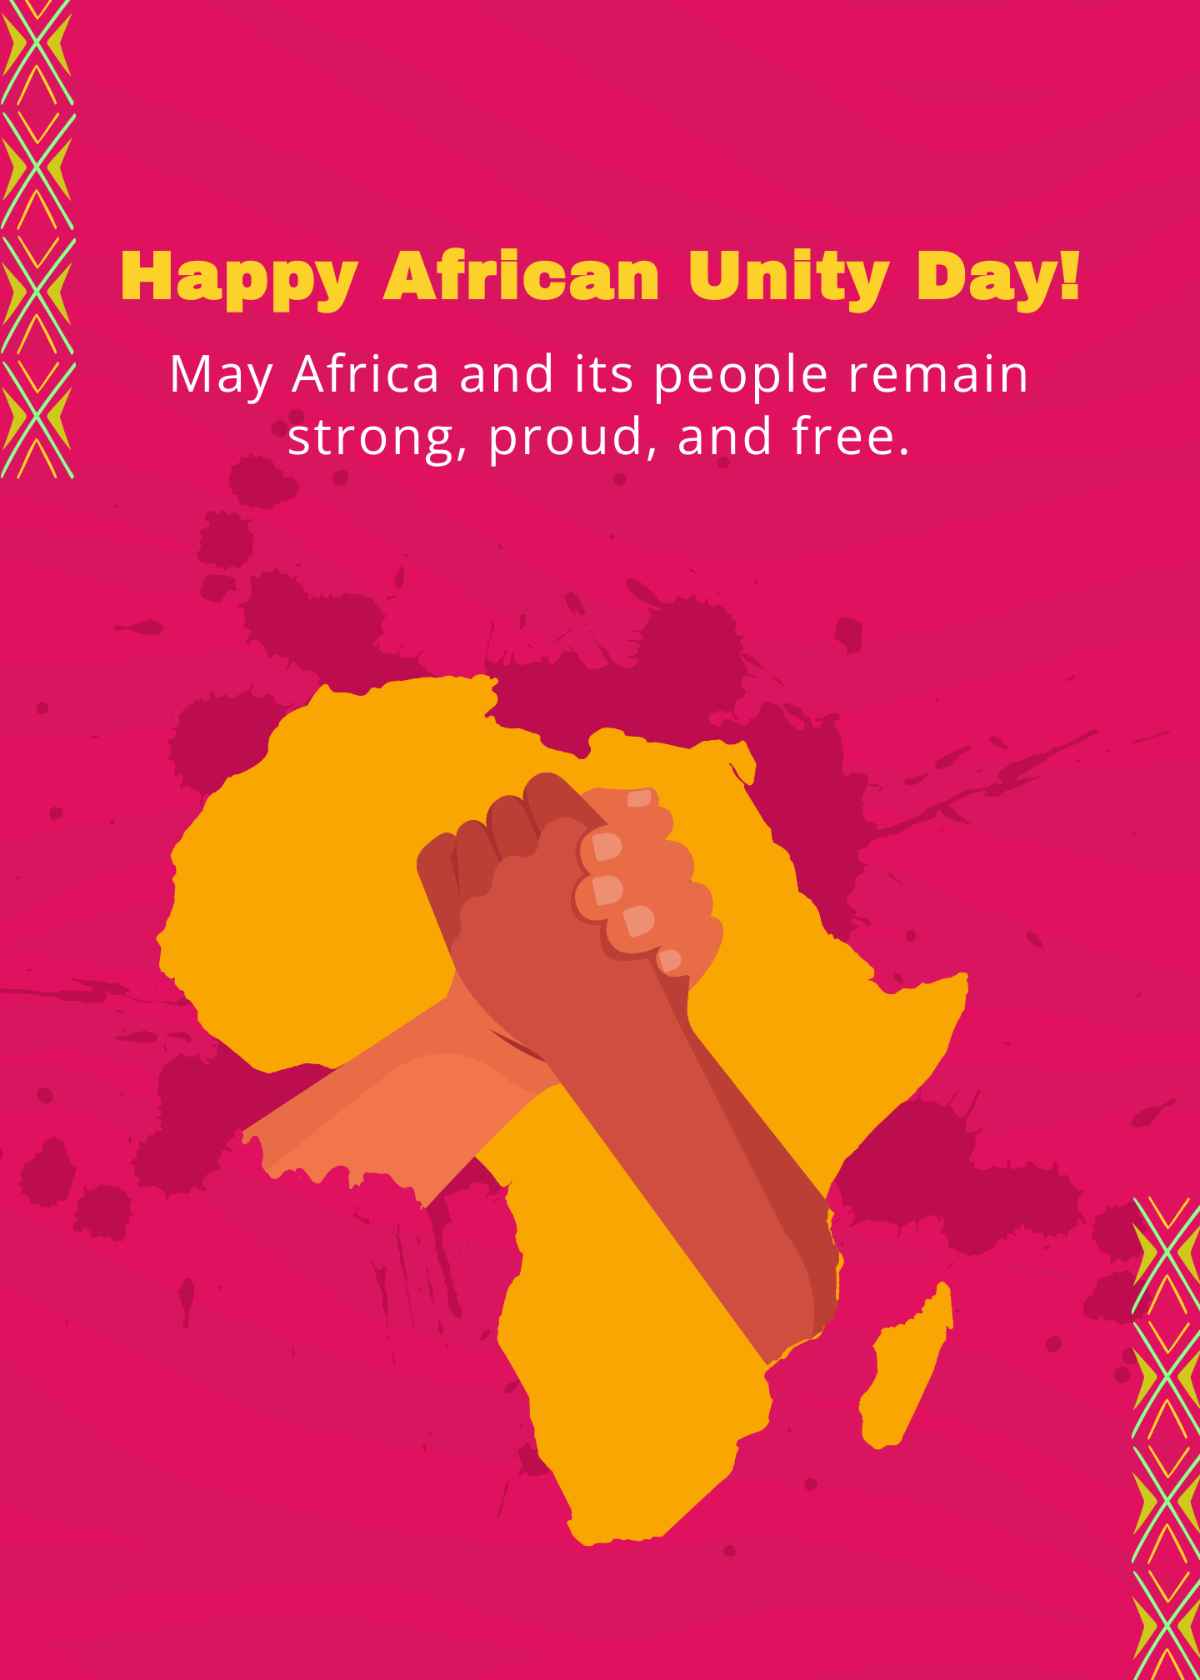 African Unity Day Greeting Card Template